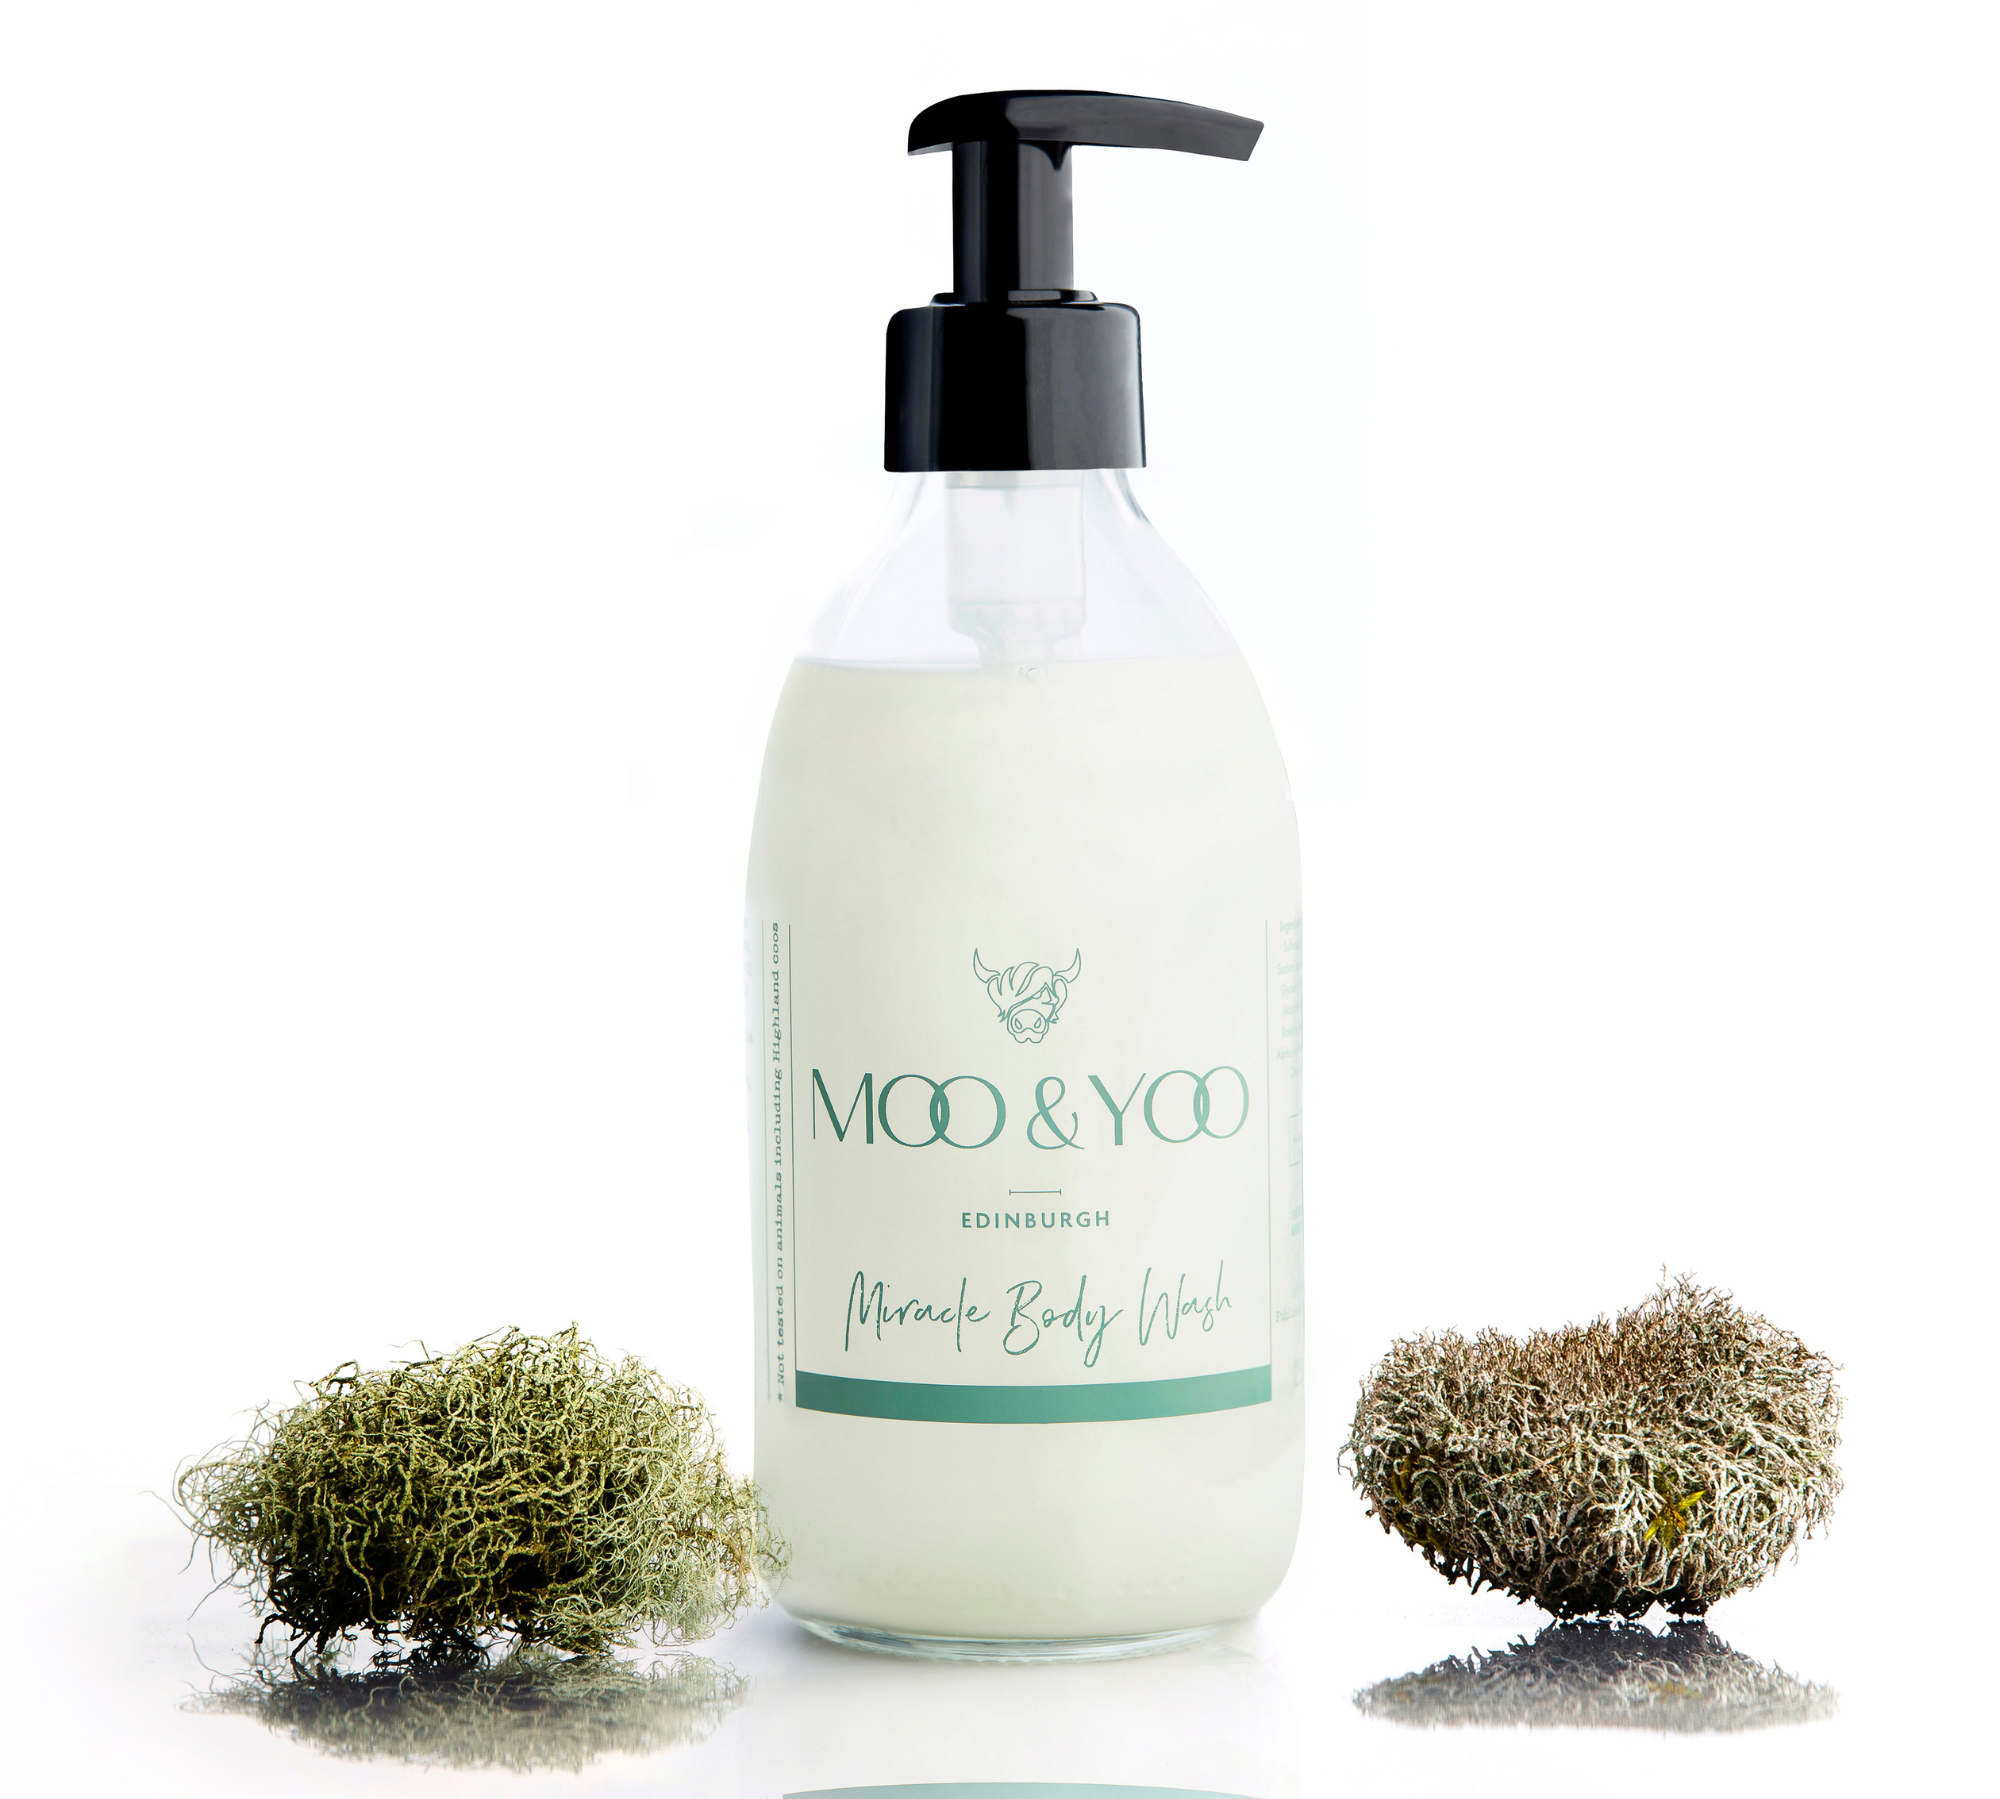 Glass bottle of Moo and Yoo Body Wash with a pump on a white background with a sprig of moss to each side.